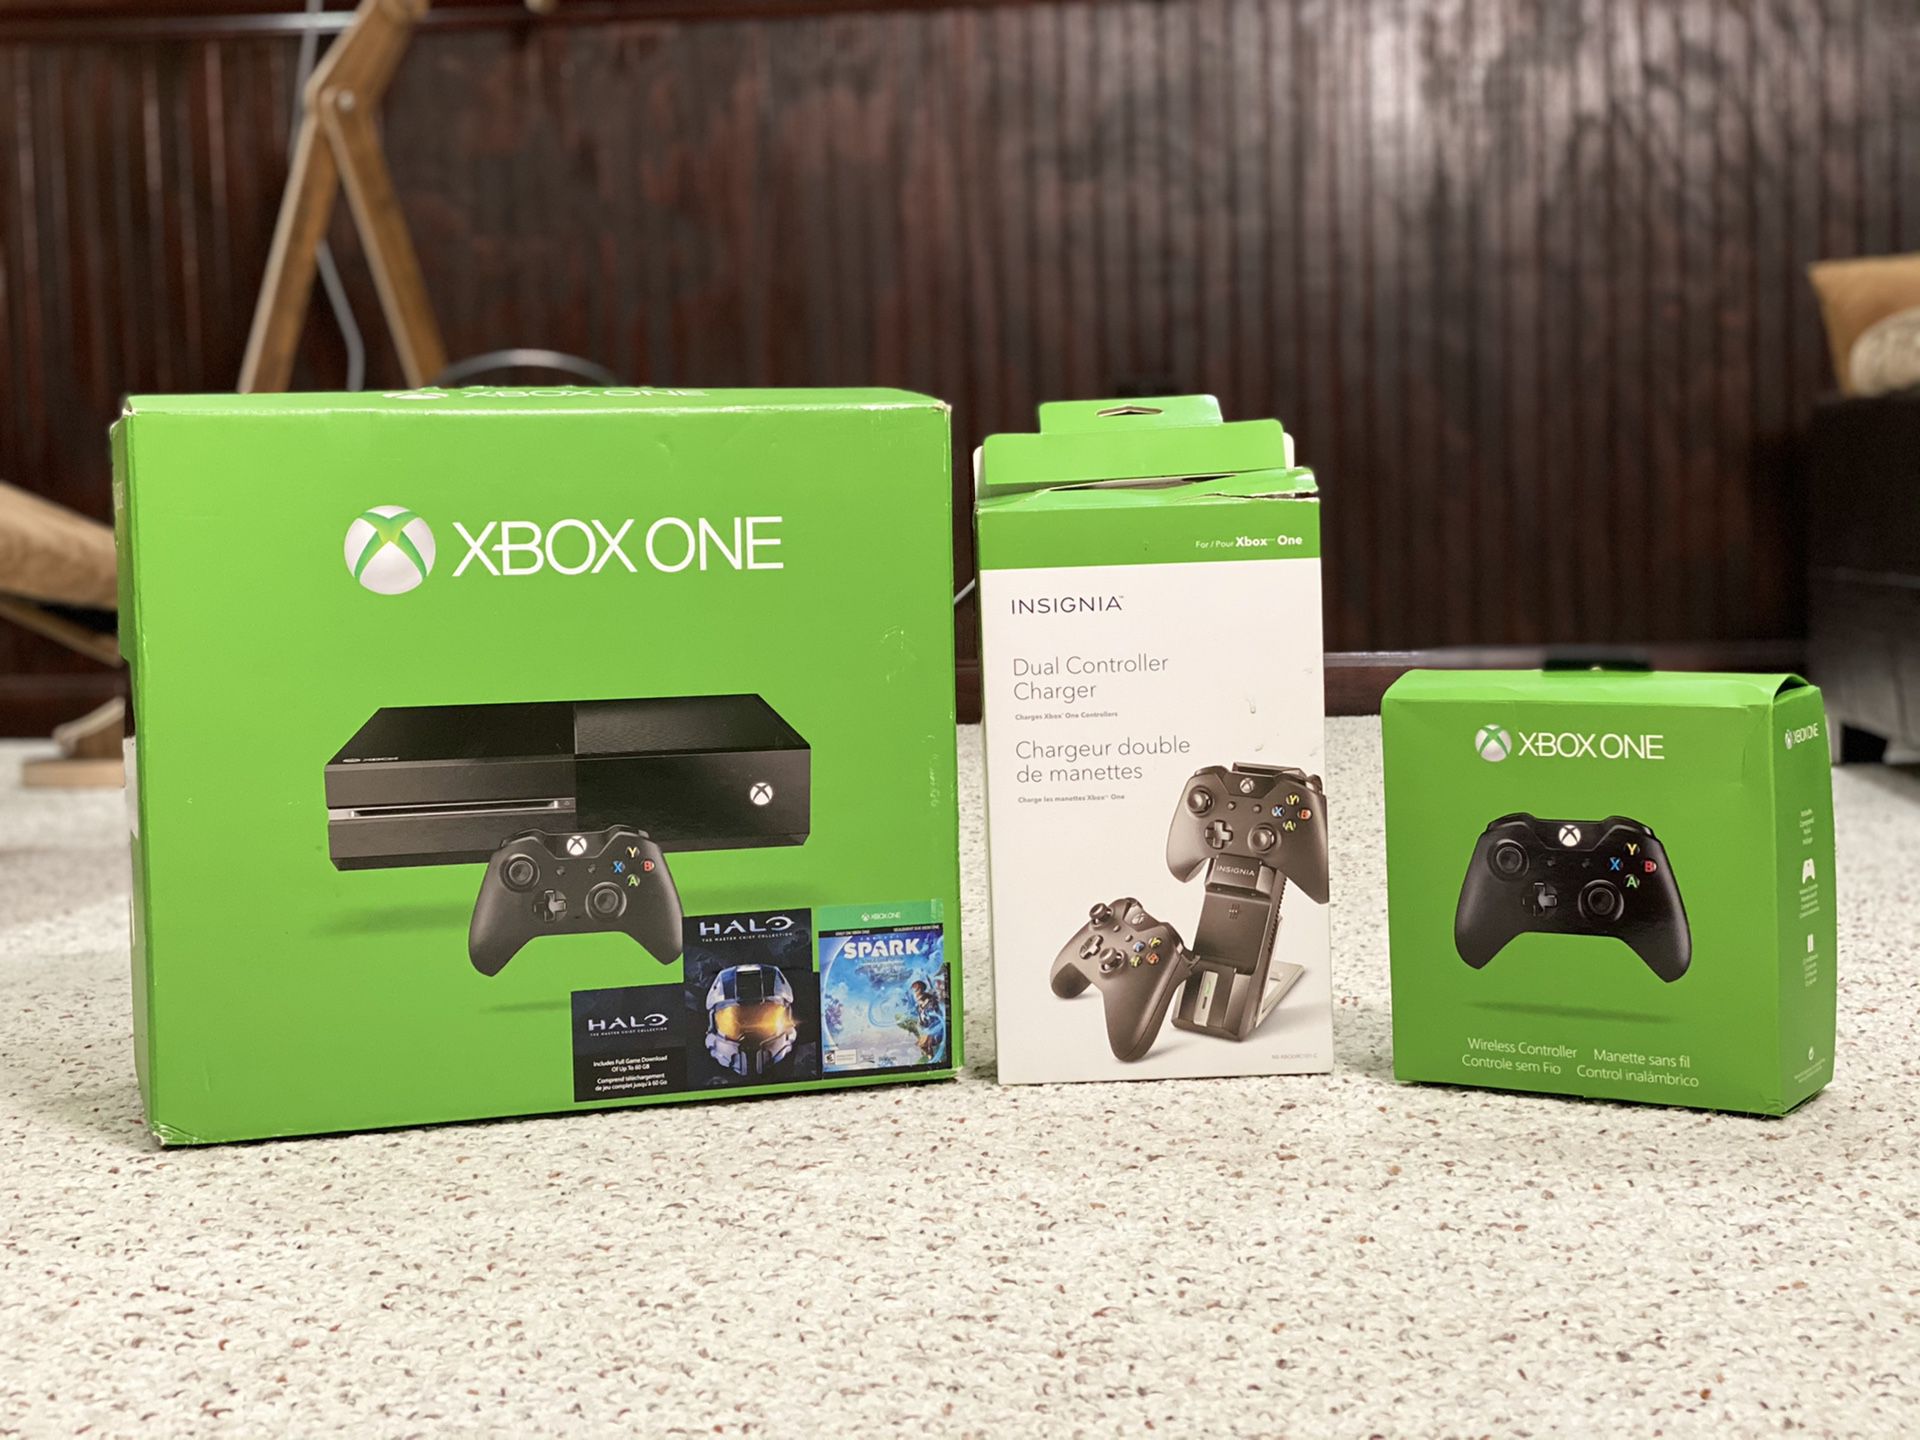 XBOX ONE +Games+ Accesories in original BOX in excellent condition